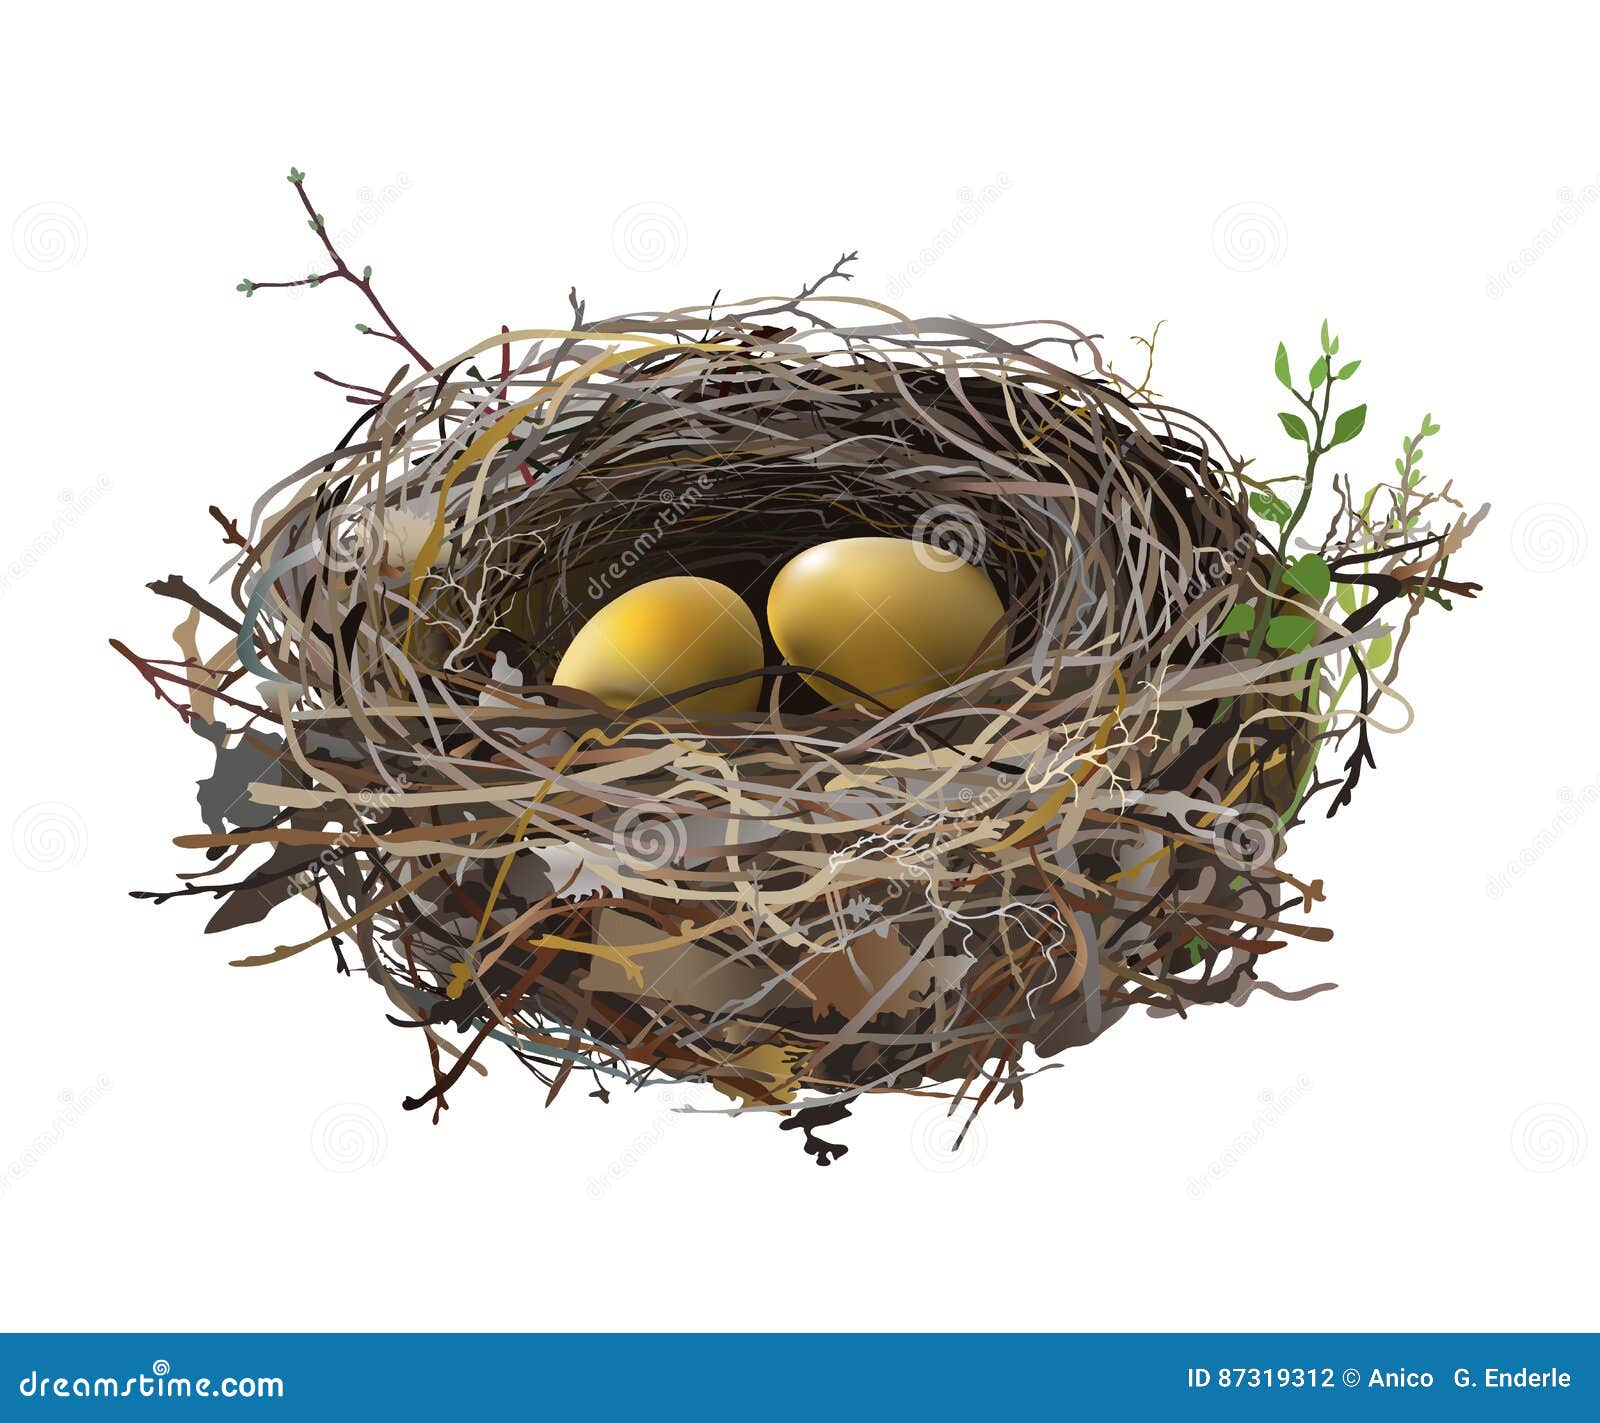 A Golden Egg In Nest With Leaves PNG Images